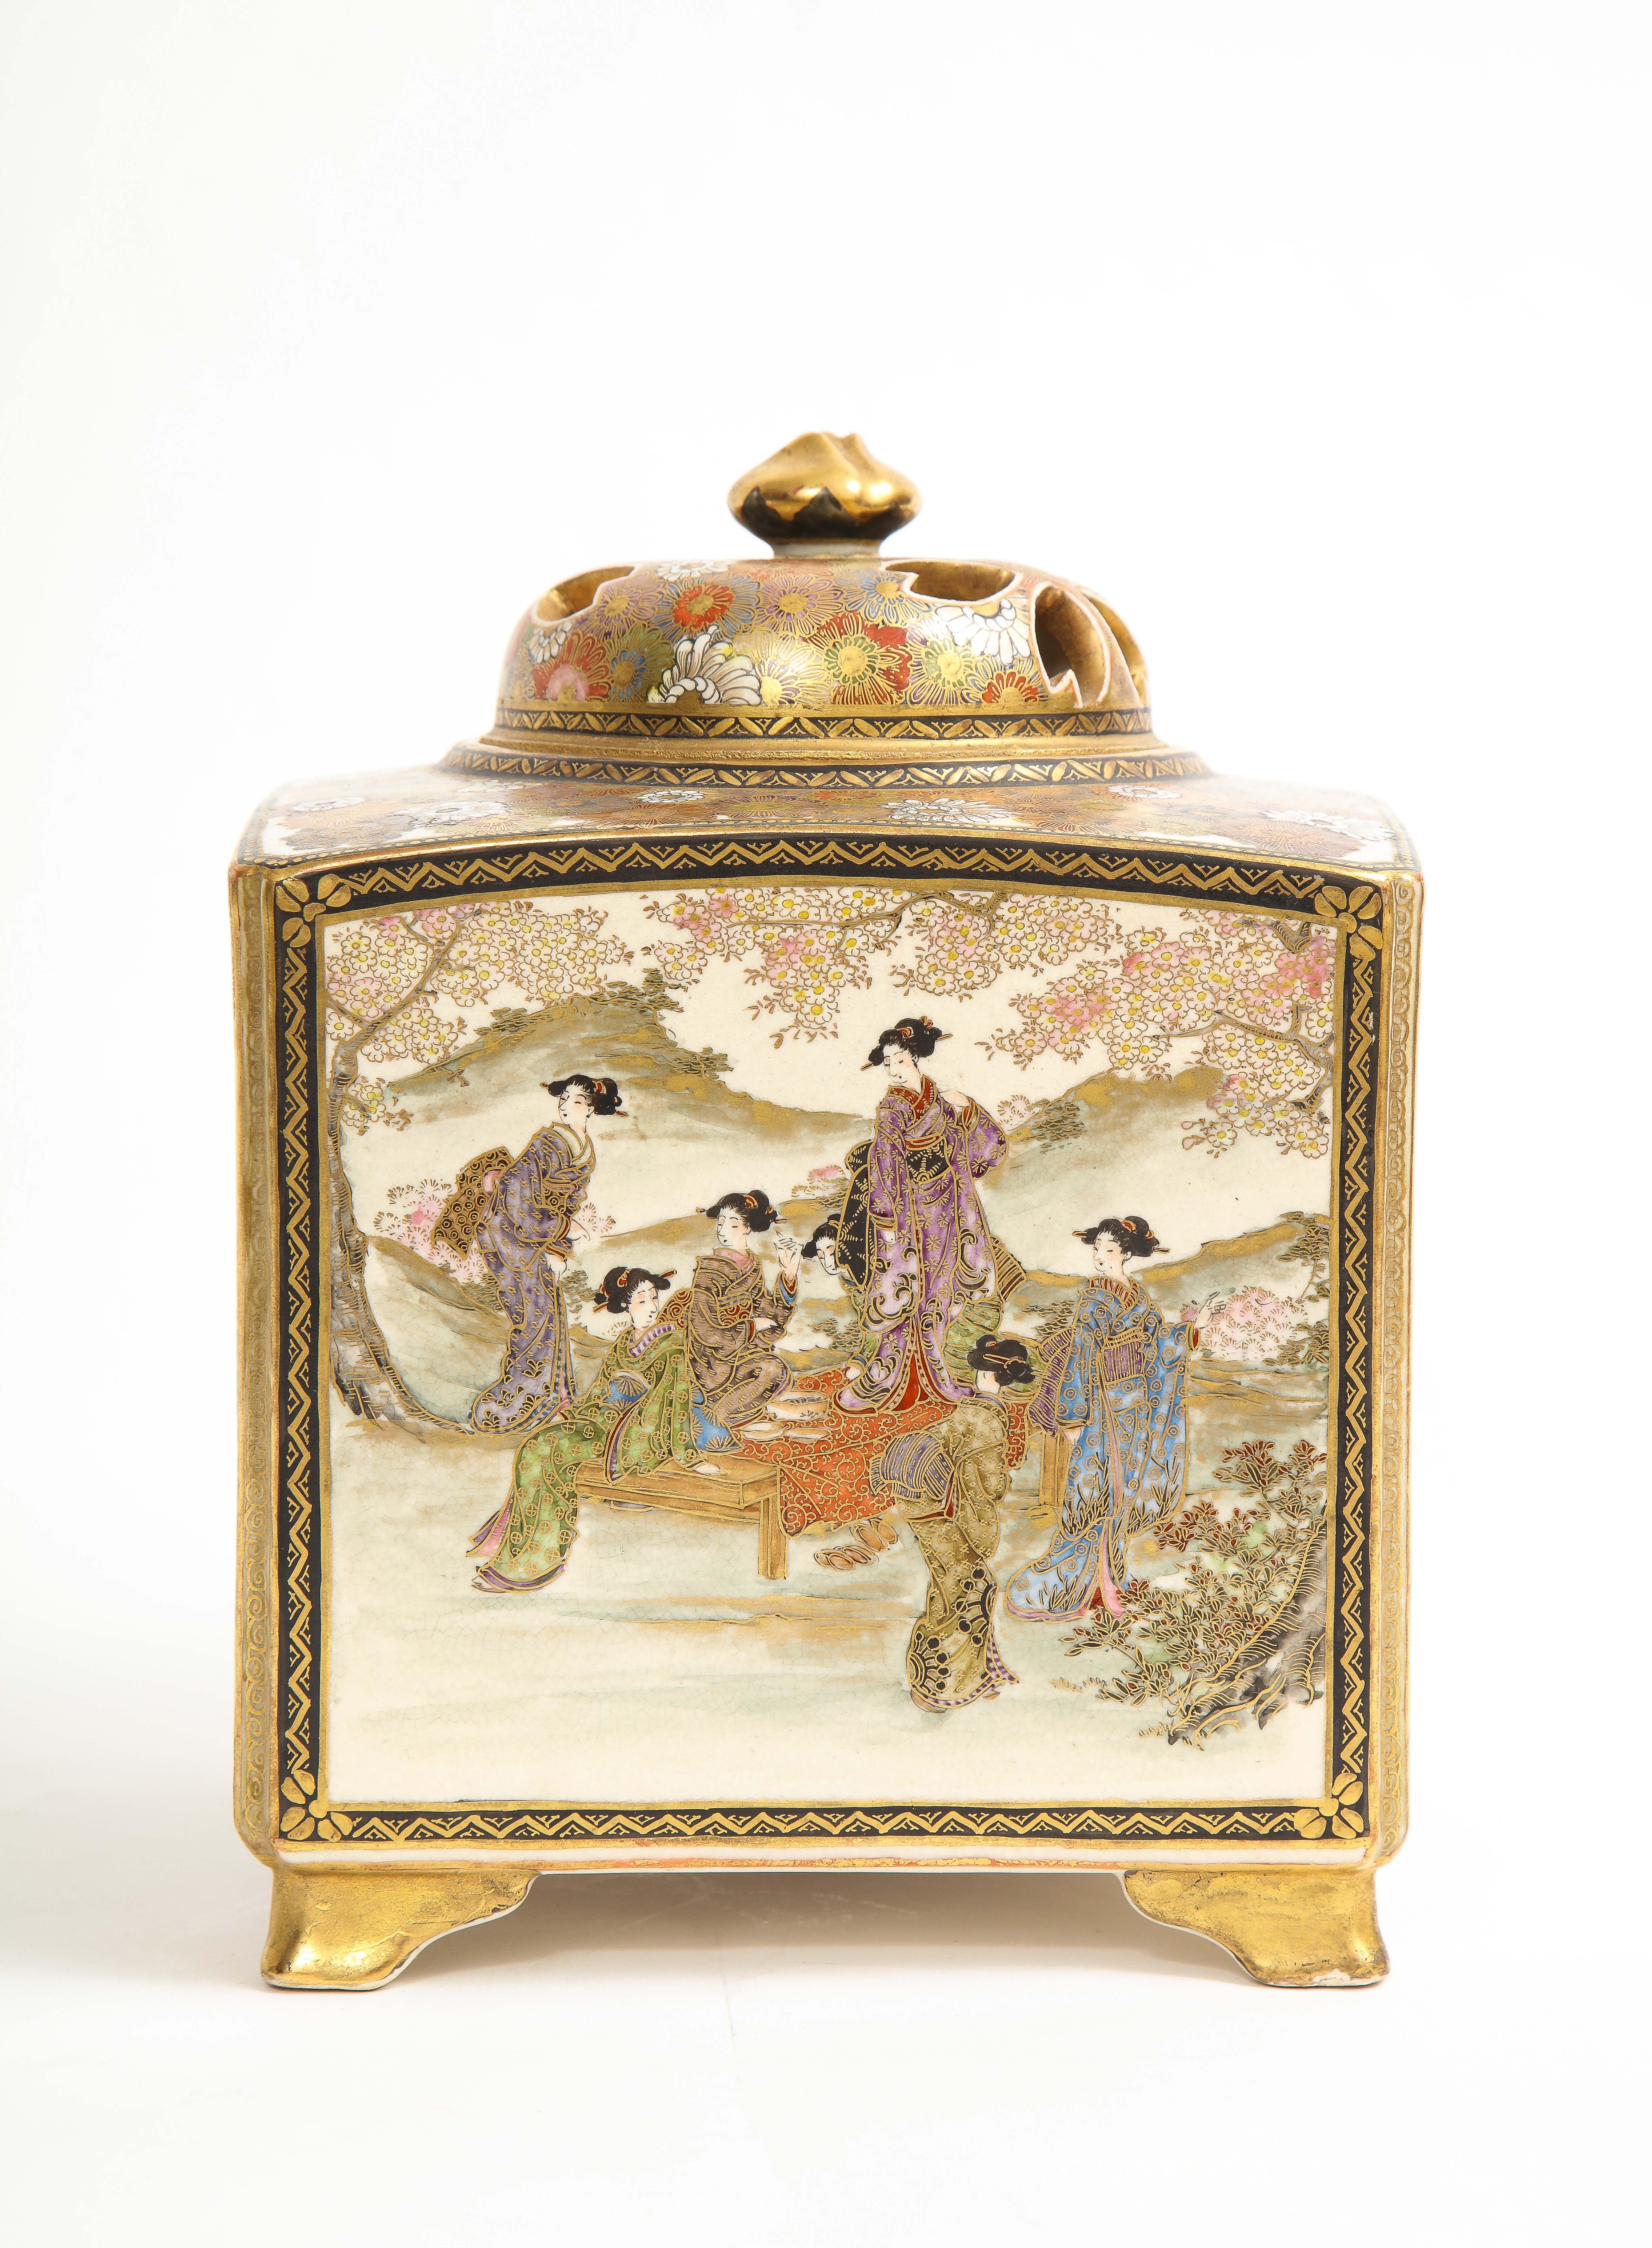 Hand-Carved A Japanese Meiji Period (1868-1912).Large Satsuma Square Censer And Cover, Mark